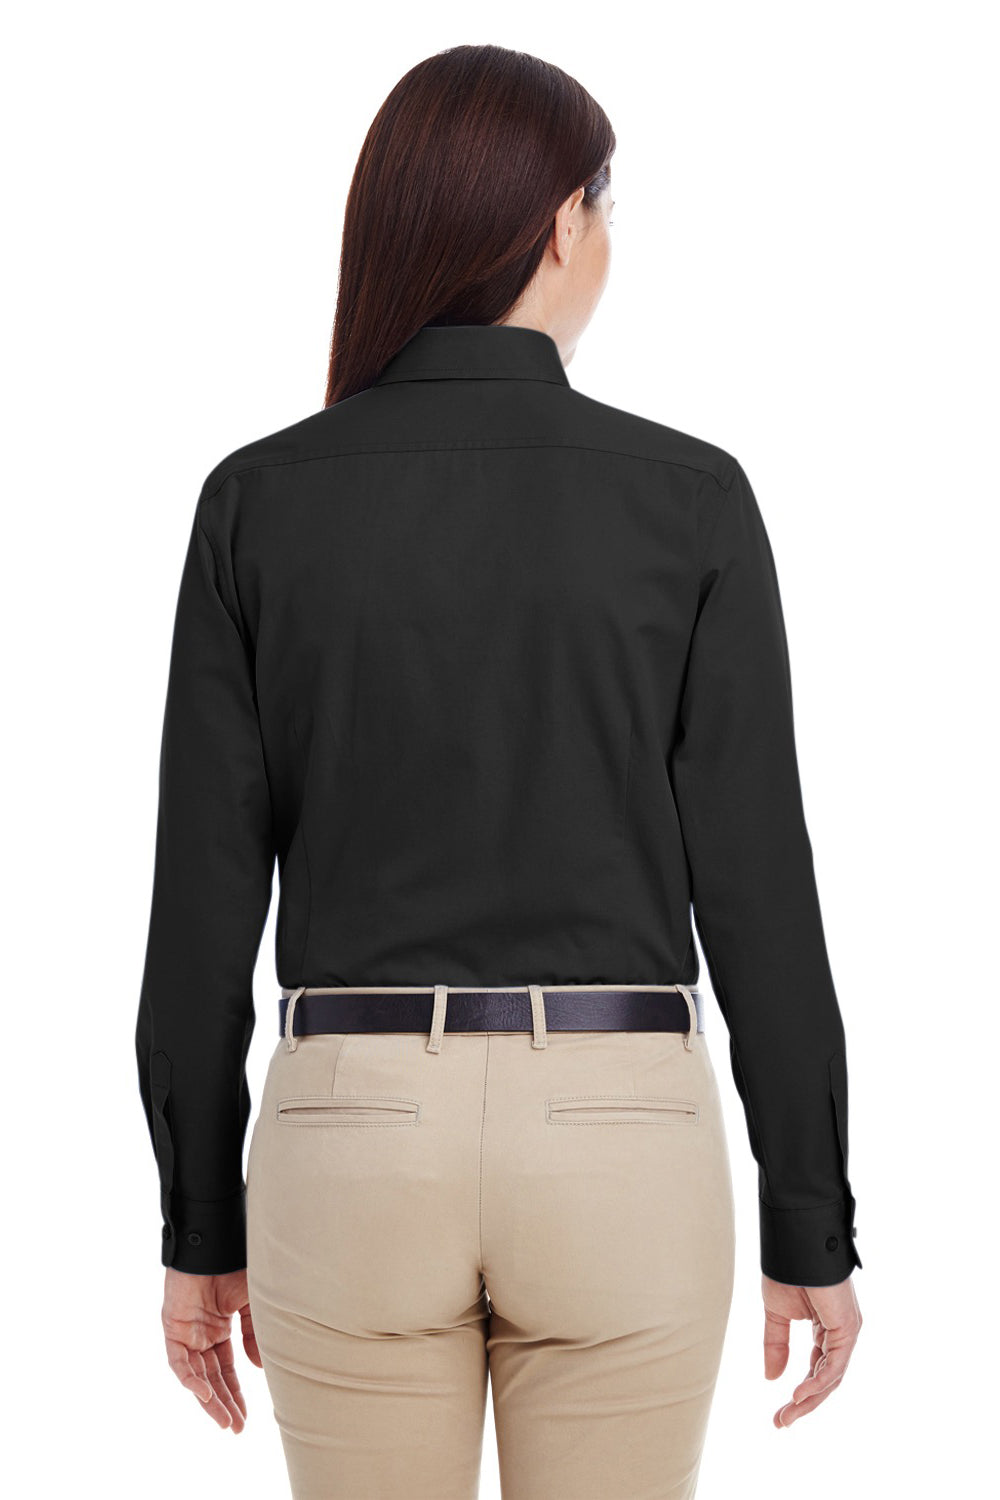 Harriton M581W Womens Foundation Stain Resistant Long Sleeve Button Down Shirt Black Back